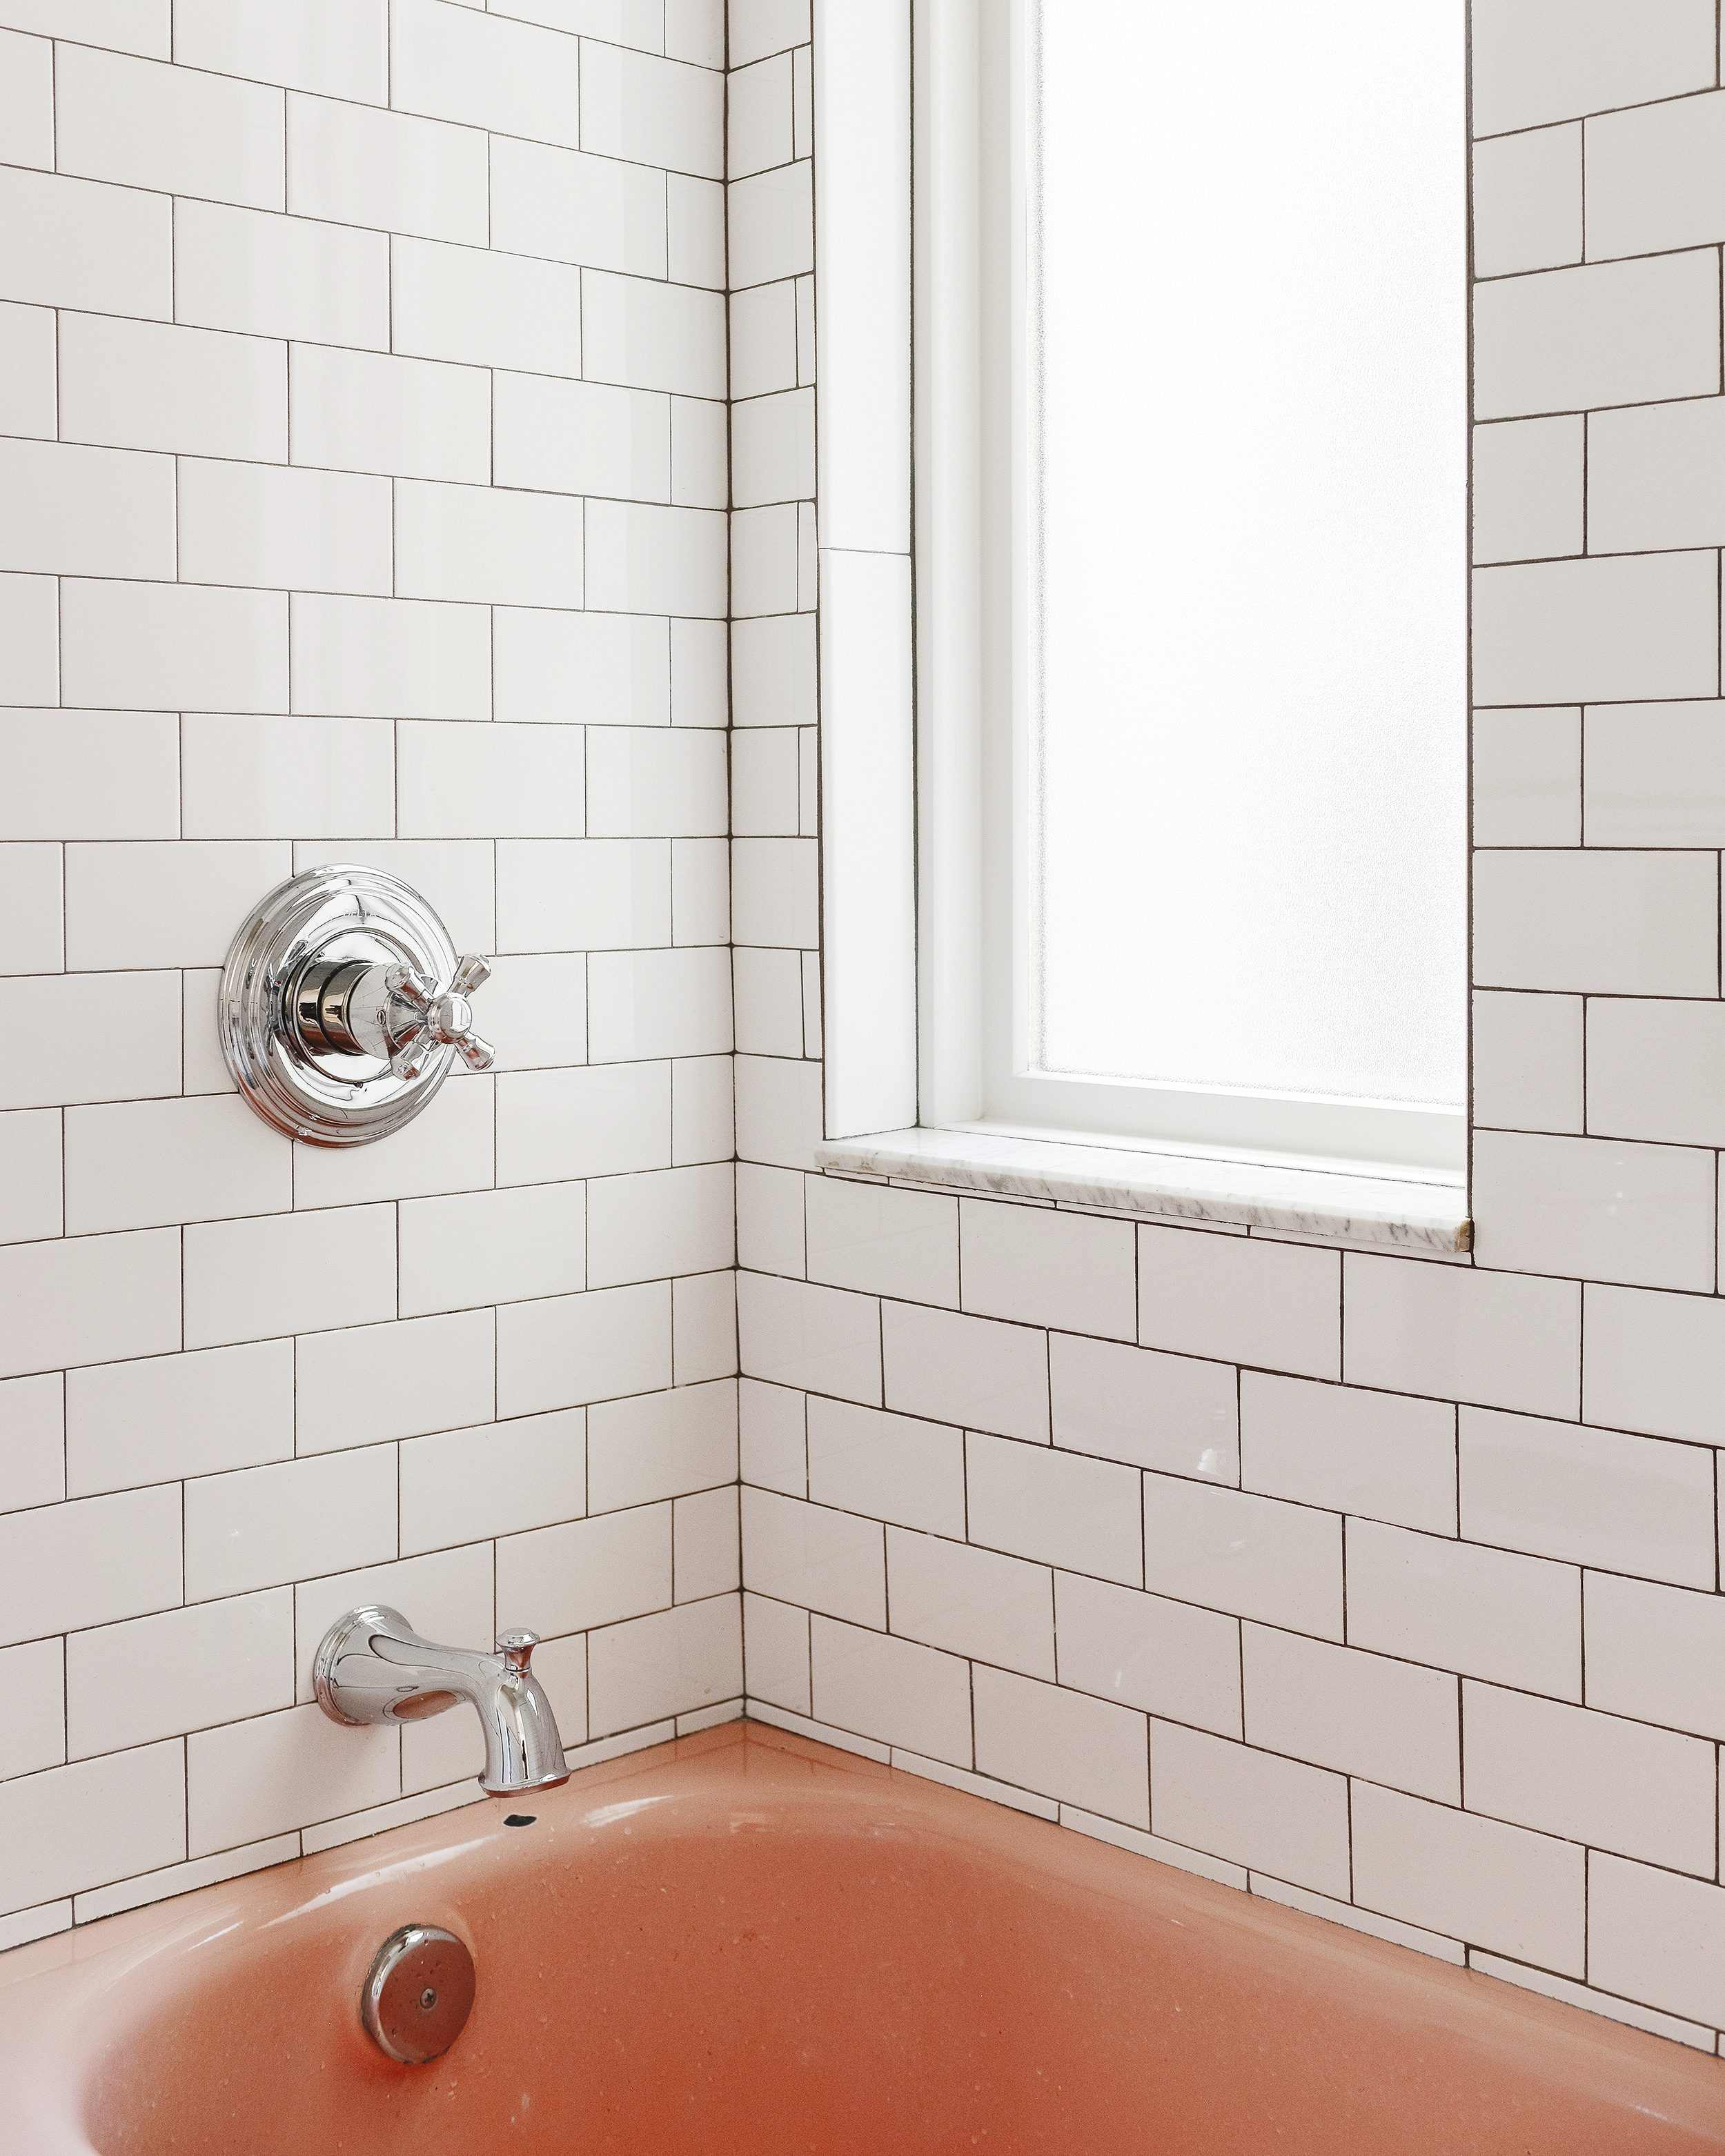 detail of subway tile with polished chrome Delta fixtures | via Yellow Brick Home